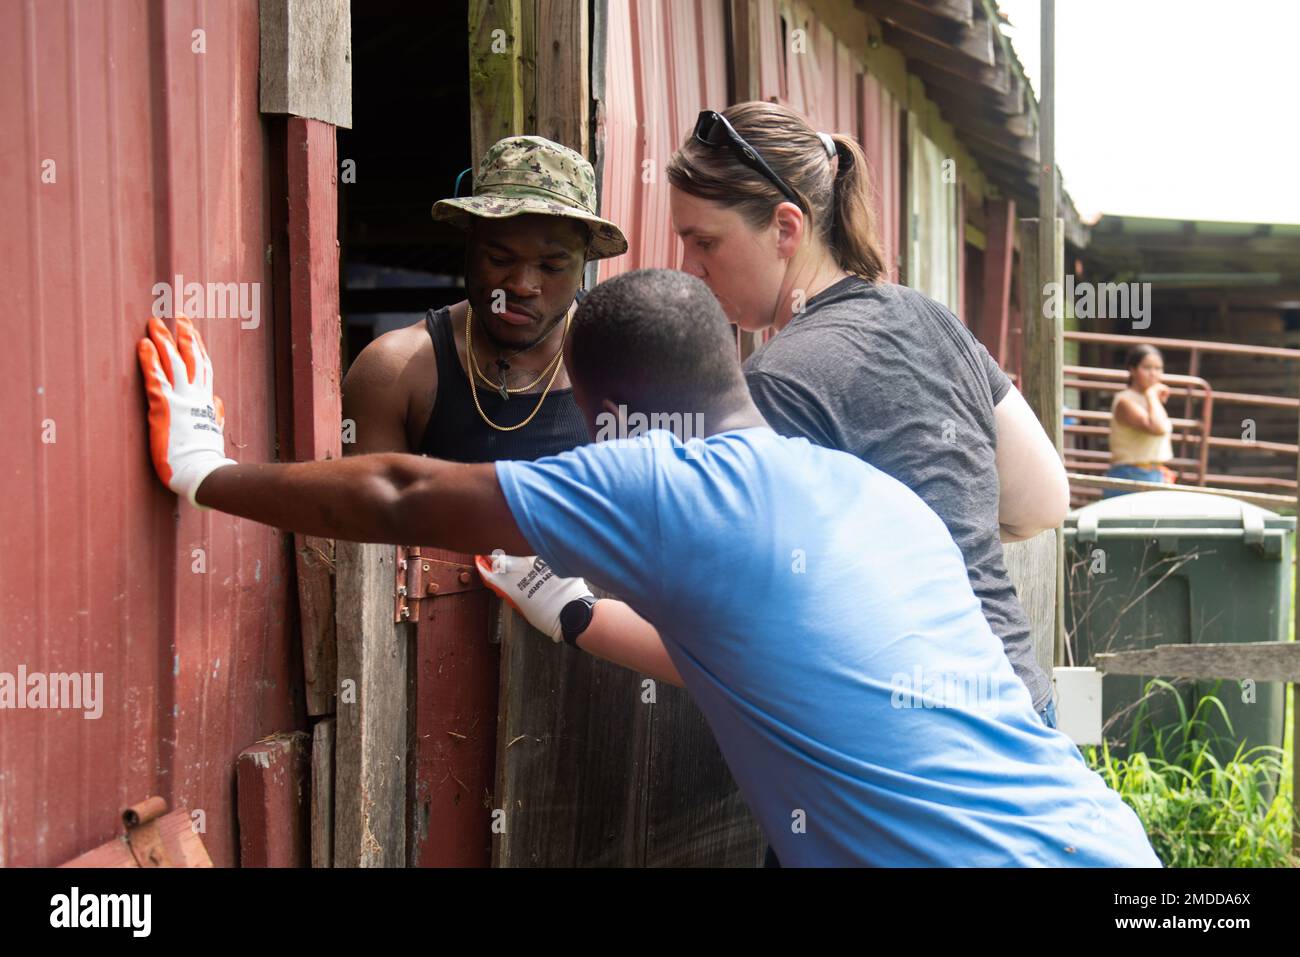 U.S. Navy Sailors, assigned to the aircraft carrier USS John C. Stennis (CVN 74), remove a gate at Willow Woods Equine Sanctuary as part of a community relations event, in Hampton, Virginia, July 16, 2022. The John C. Stennis is in Newport News Shipyard working alongside NNS, NAVSEA and contractors conducting Refueling and Complex Overhaul as part of the mission to deliver the warship back in the fight, on time and on budget, to resume its duty of defending the United States. Stock Photo